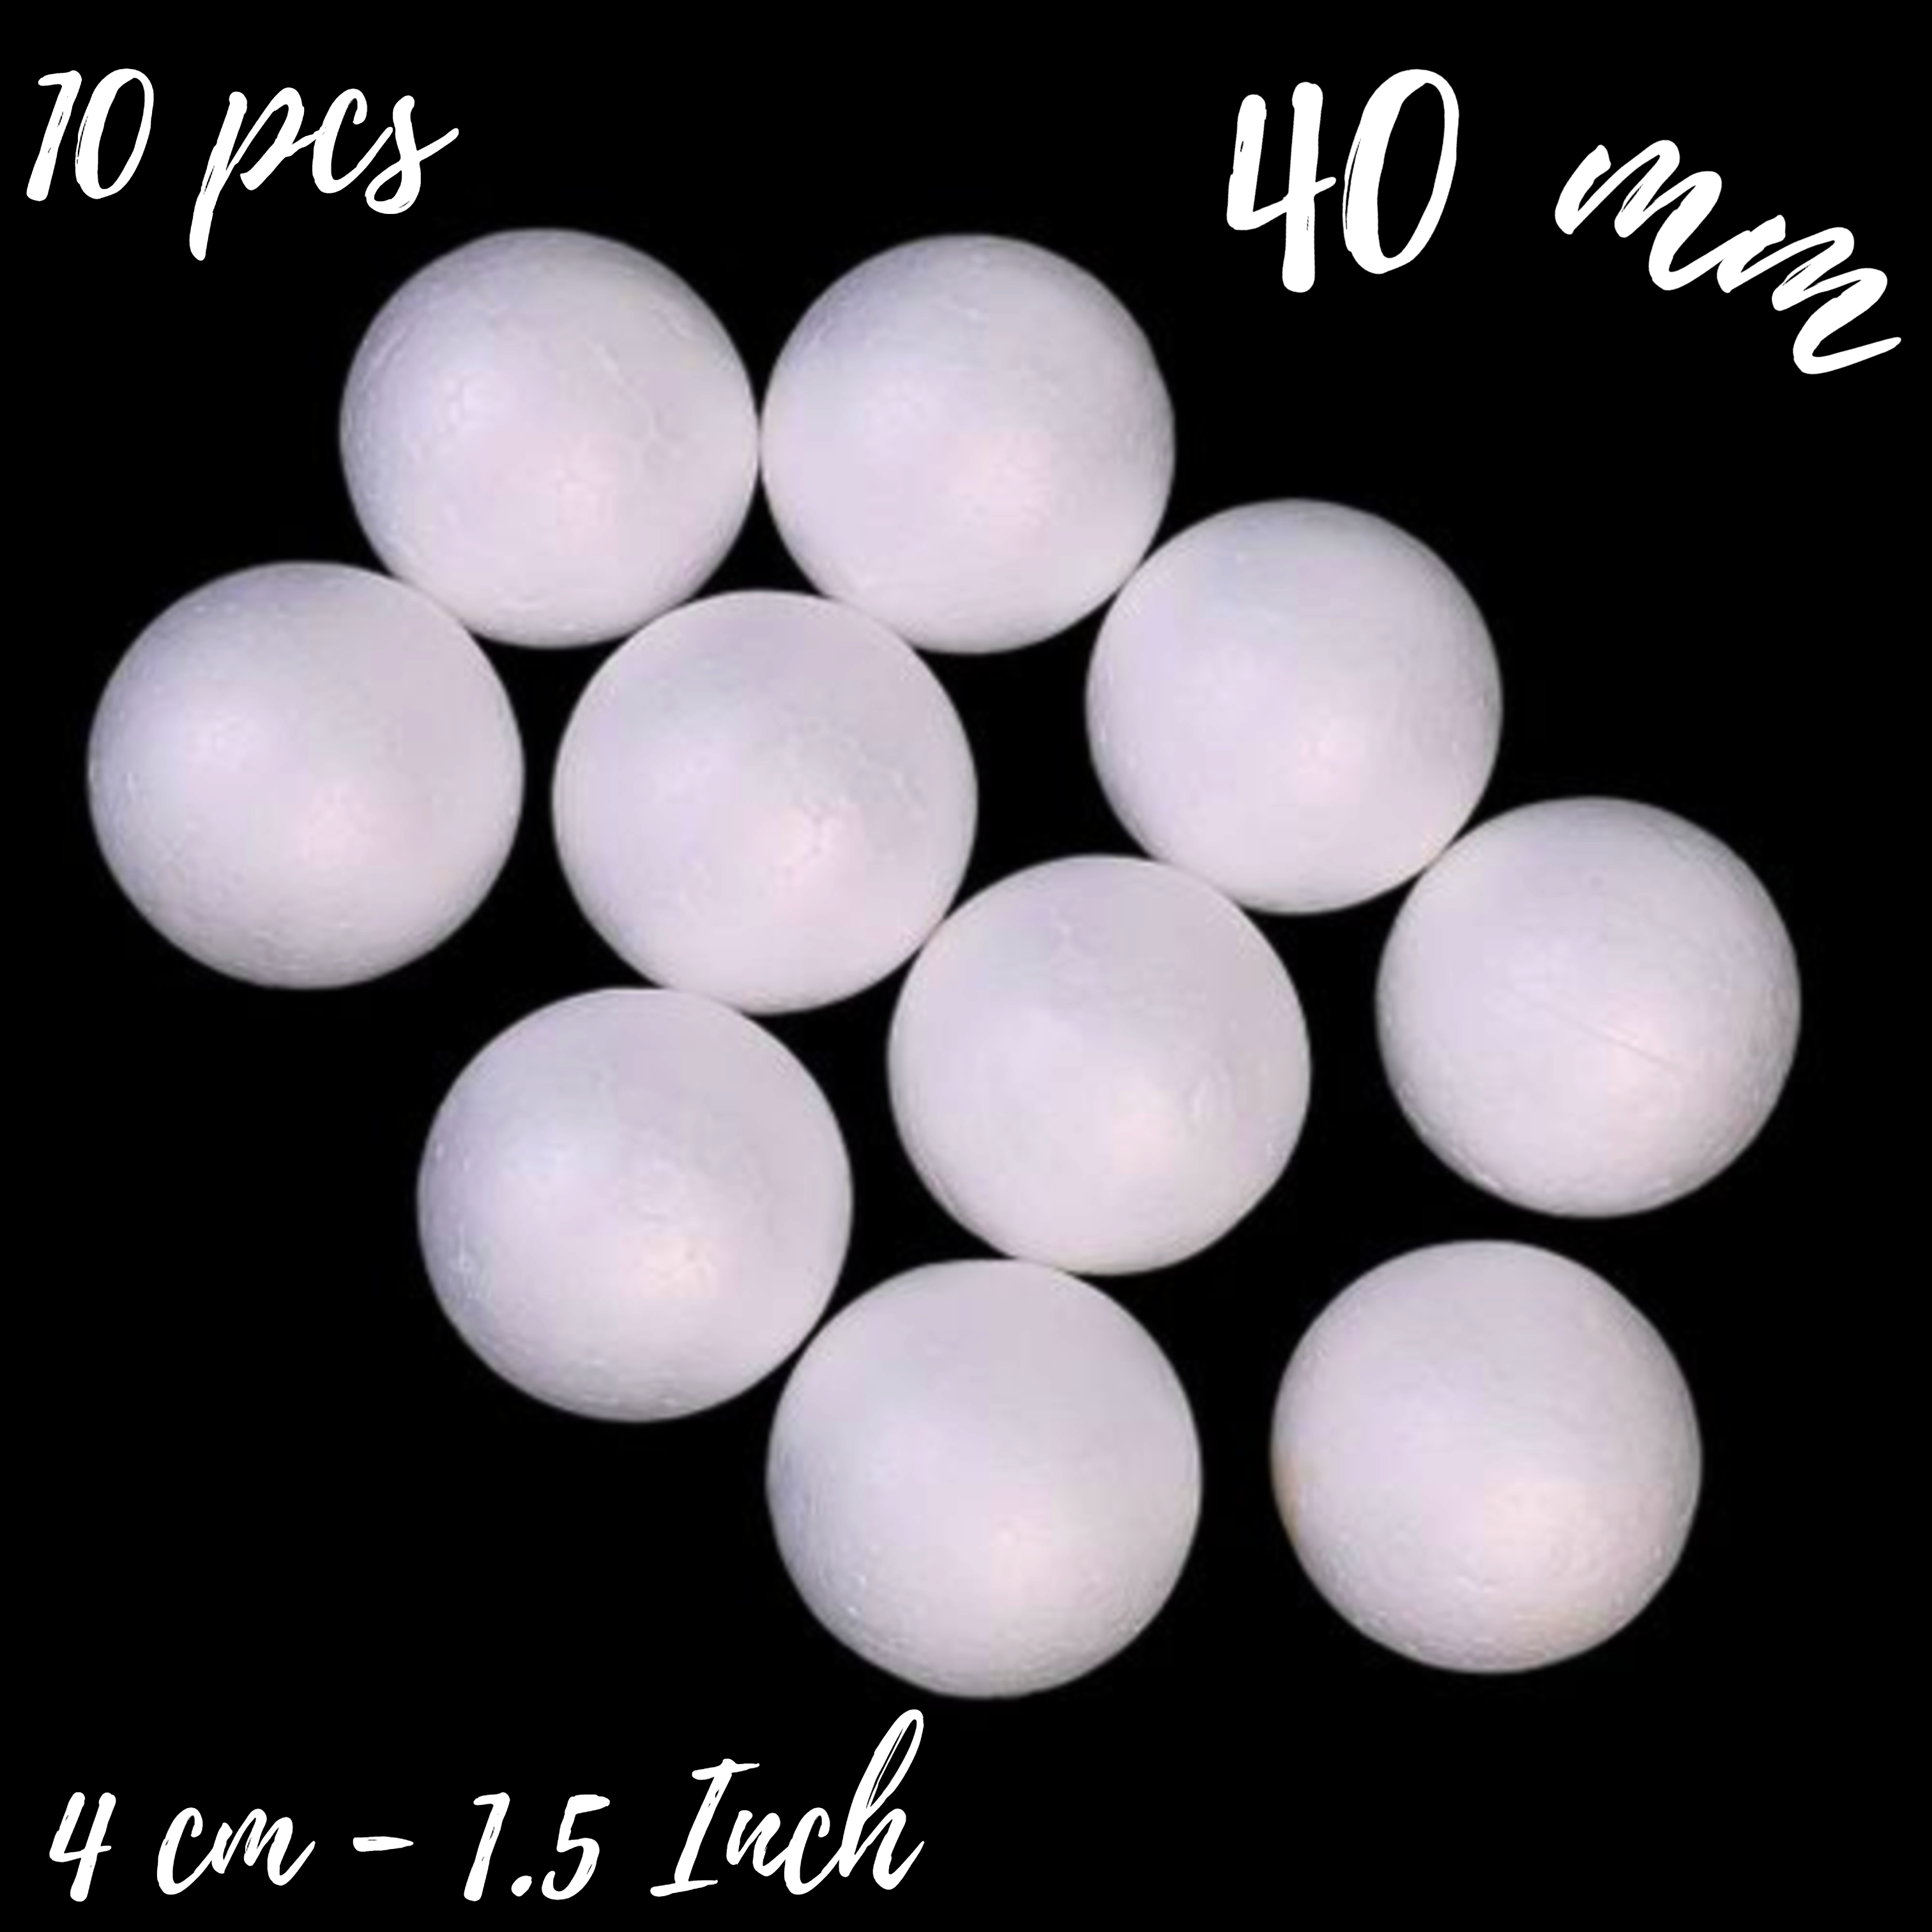 Set of 08 Thermocol ( Thermopol ) 40mm, 4cm,1.5 inch Used in Solar DIY Projects, Art Craft Decoration